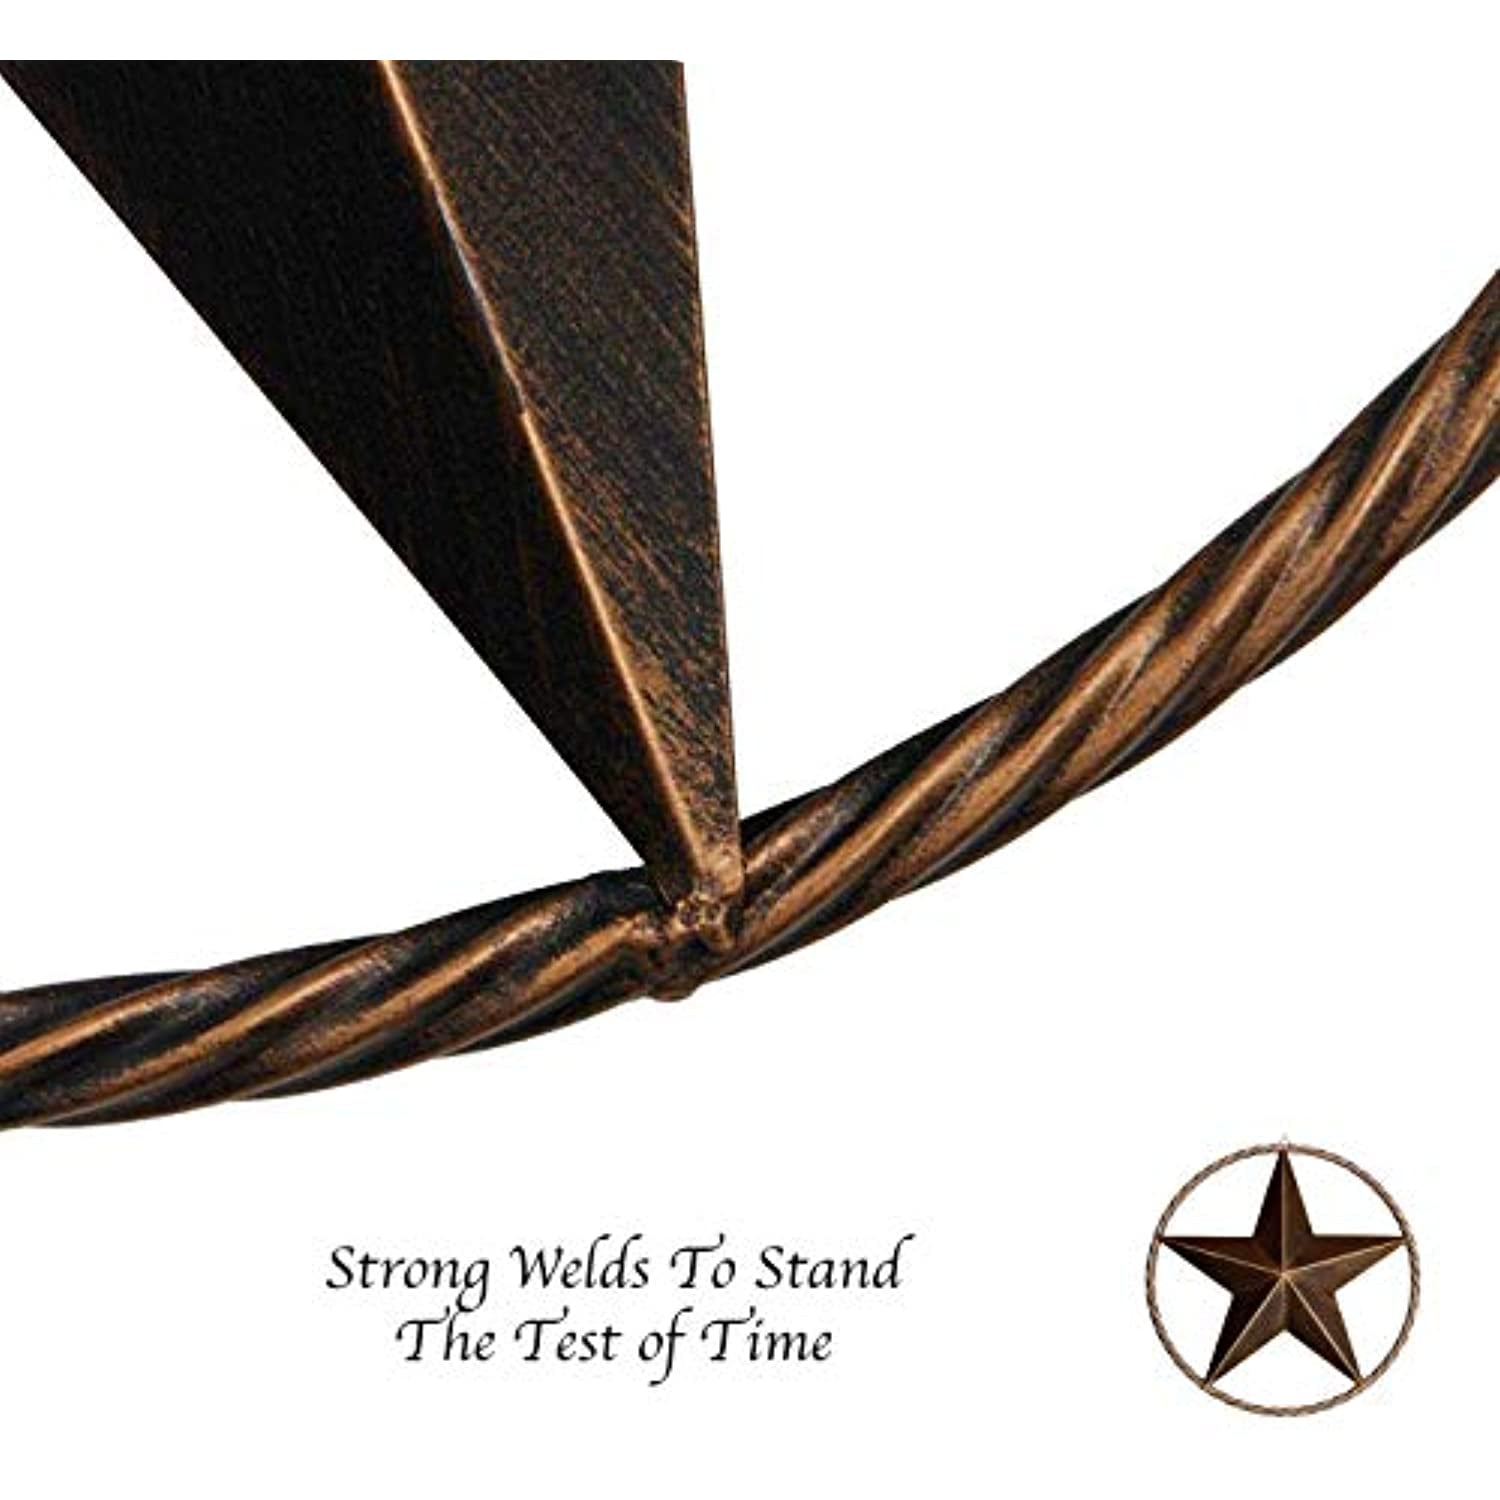 Rustic Western Wall Decor 12" 3D Metal Texas Barn Star With Rope Look Ring 